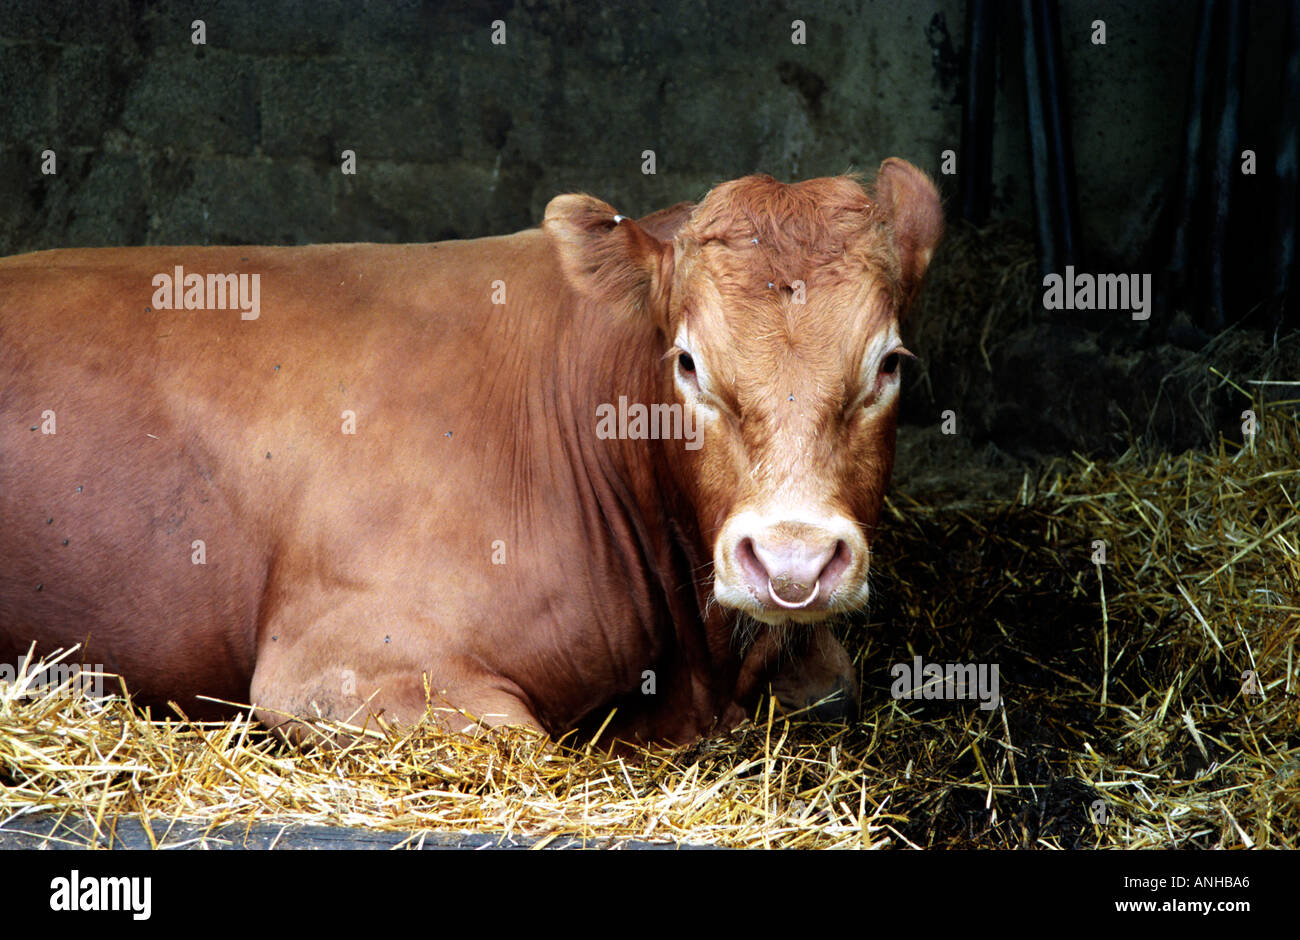 A bull lies on a bed of straw and stares back at the camera Stock Photo